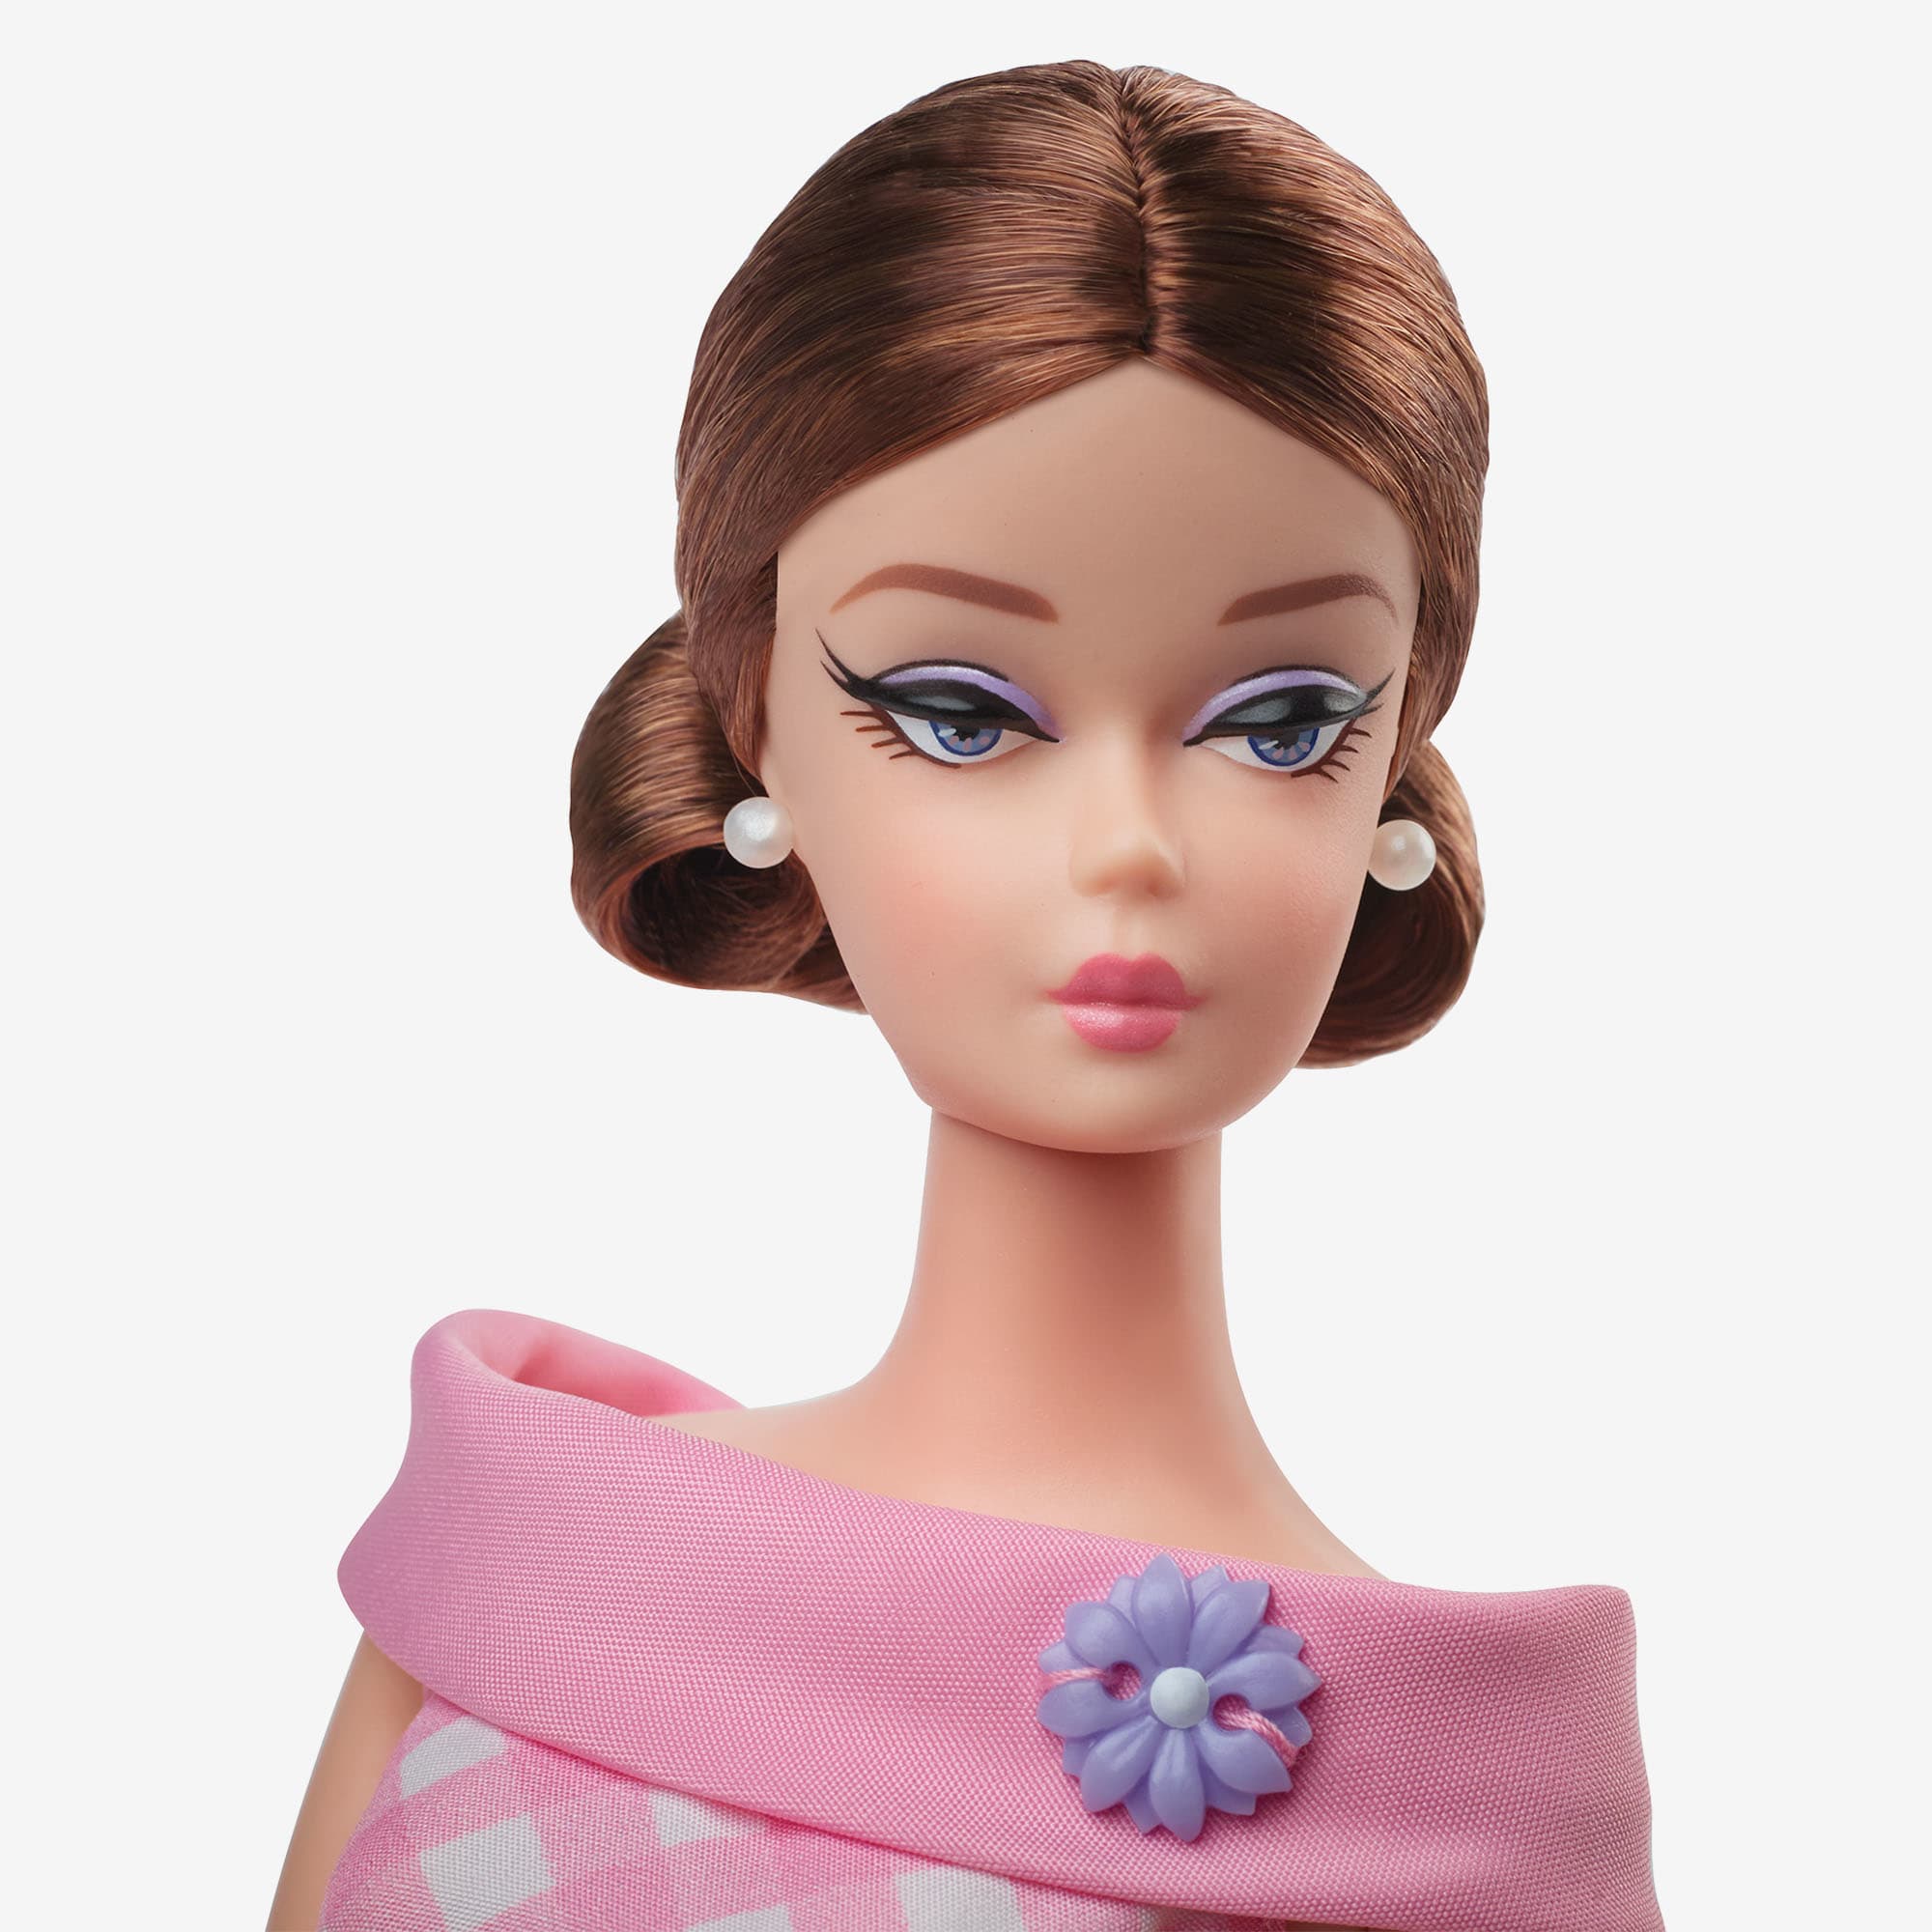 Barbie 12 Days of Spring Doll and Accessories